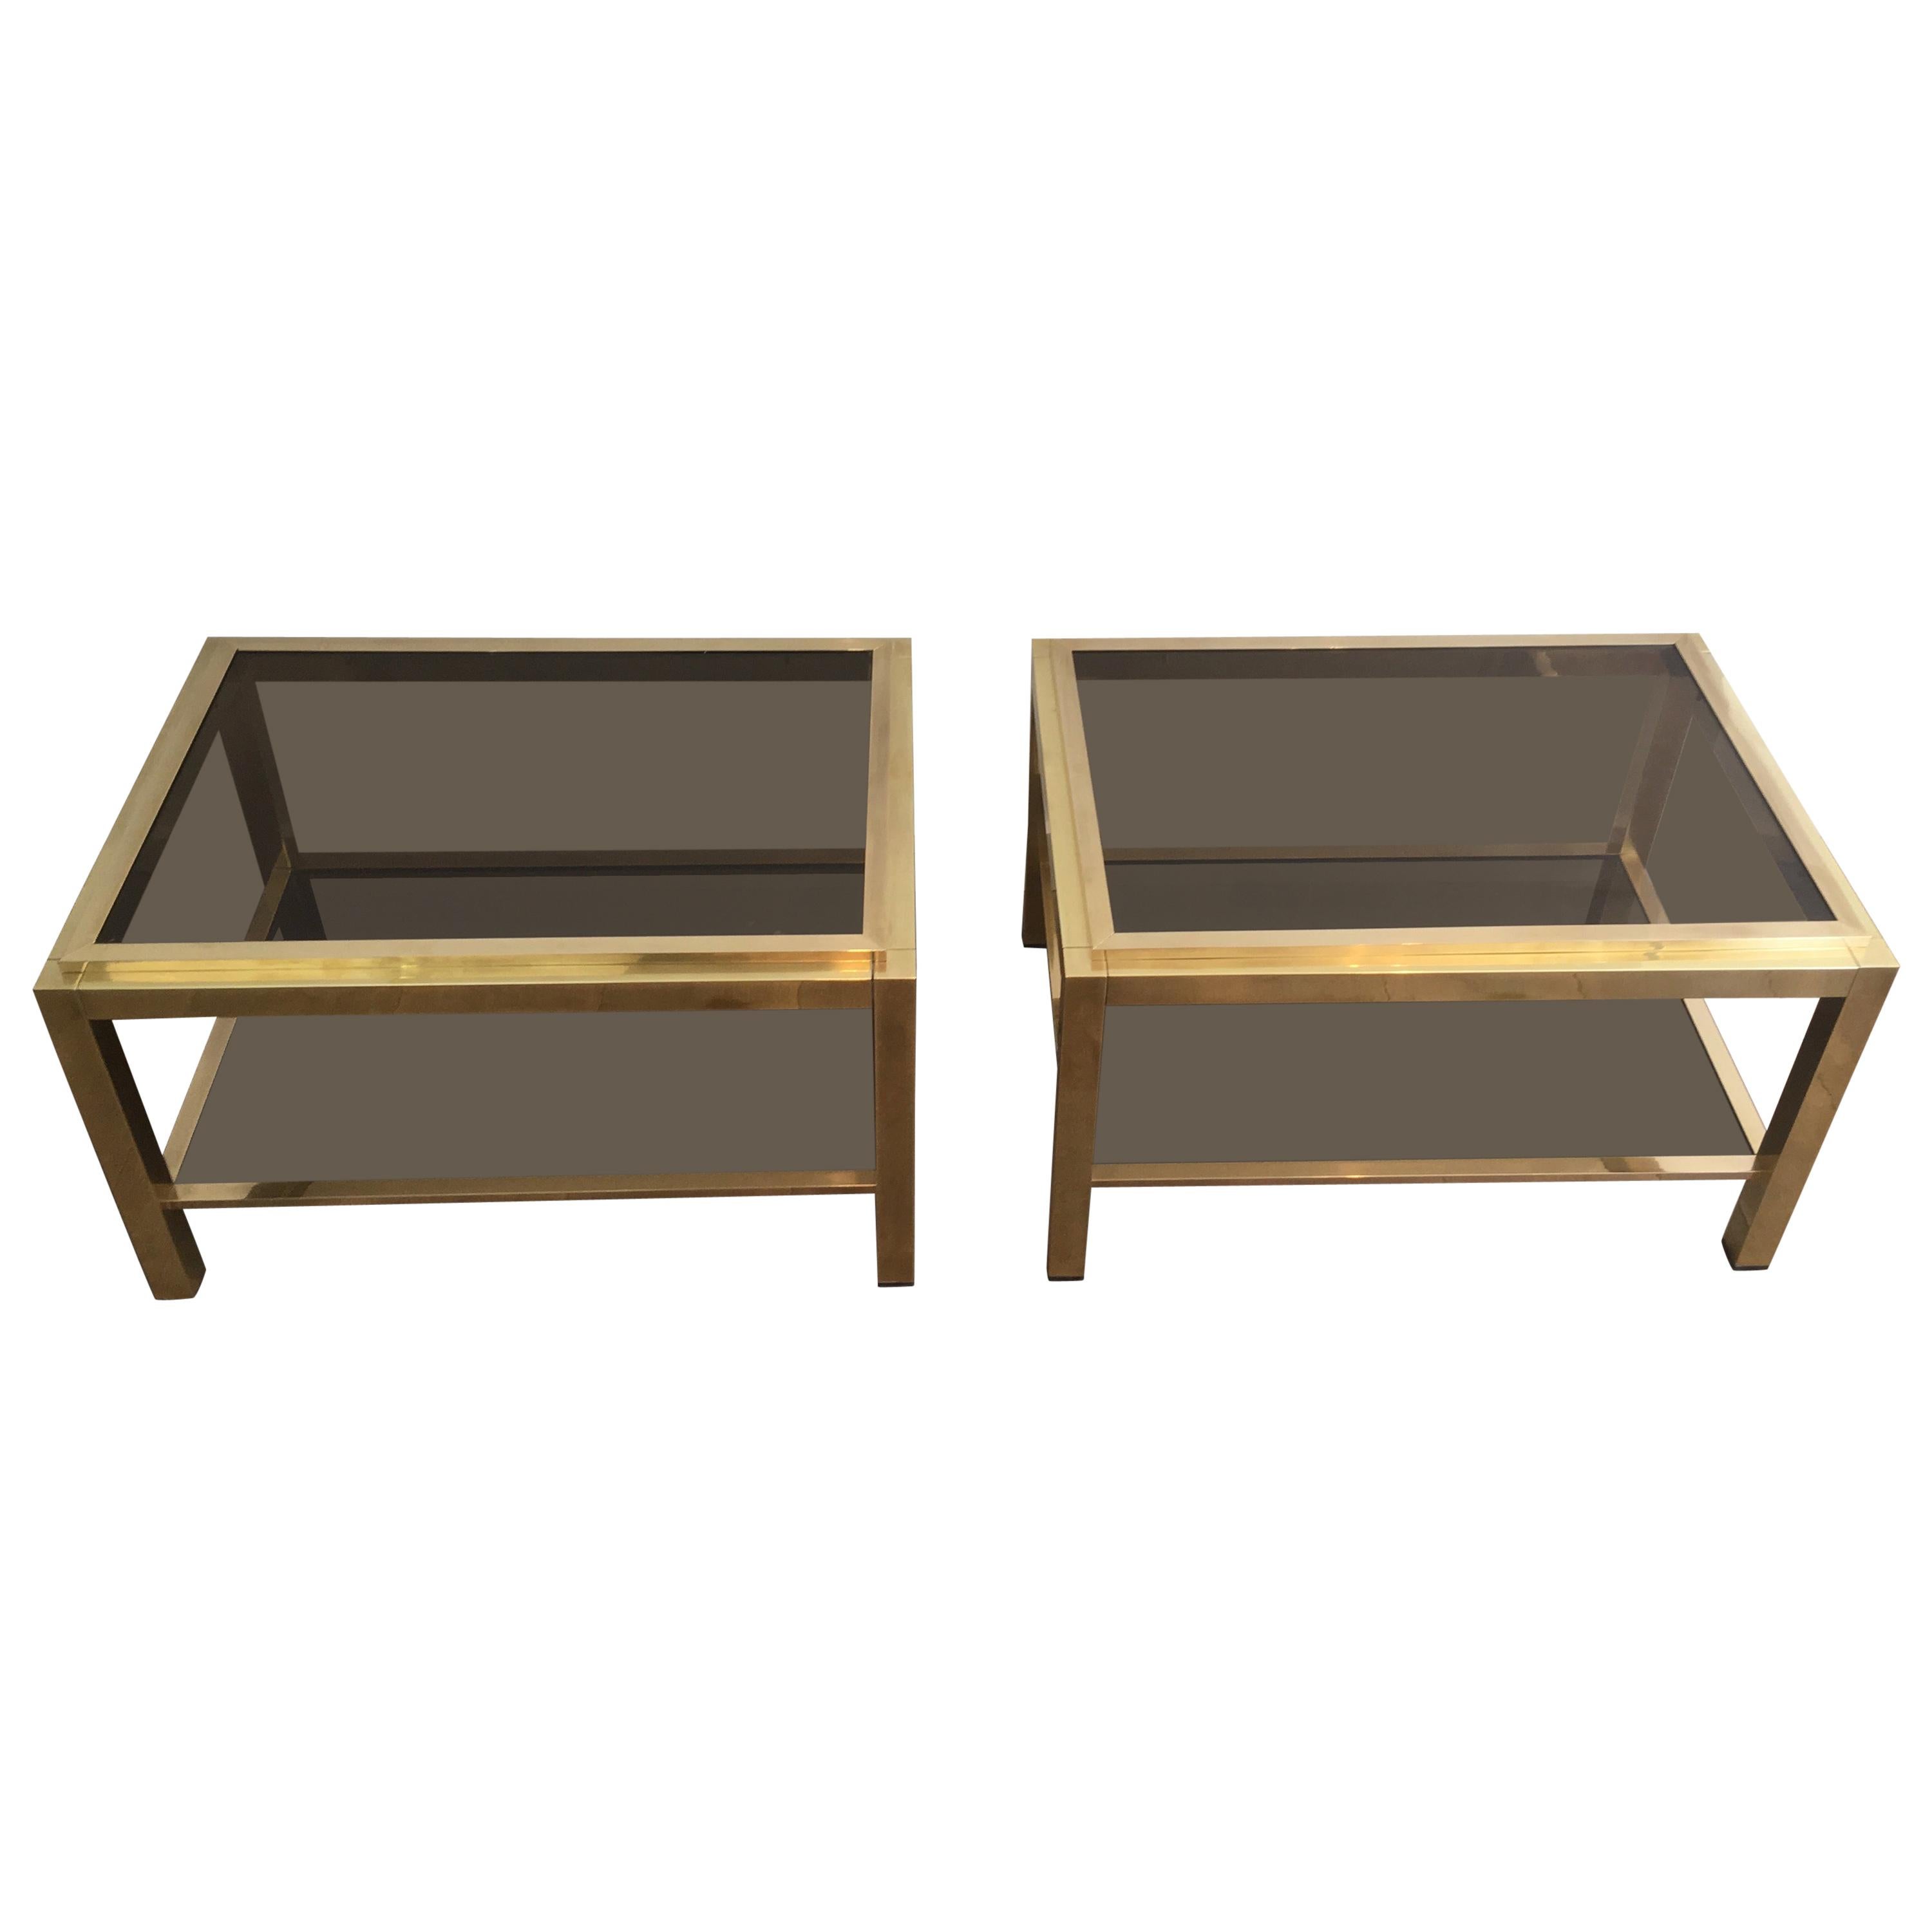 Attributed to Willy Rizzo, Pair of Large Brass Side Tables with Smoked Glass